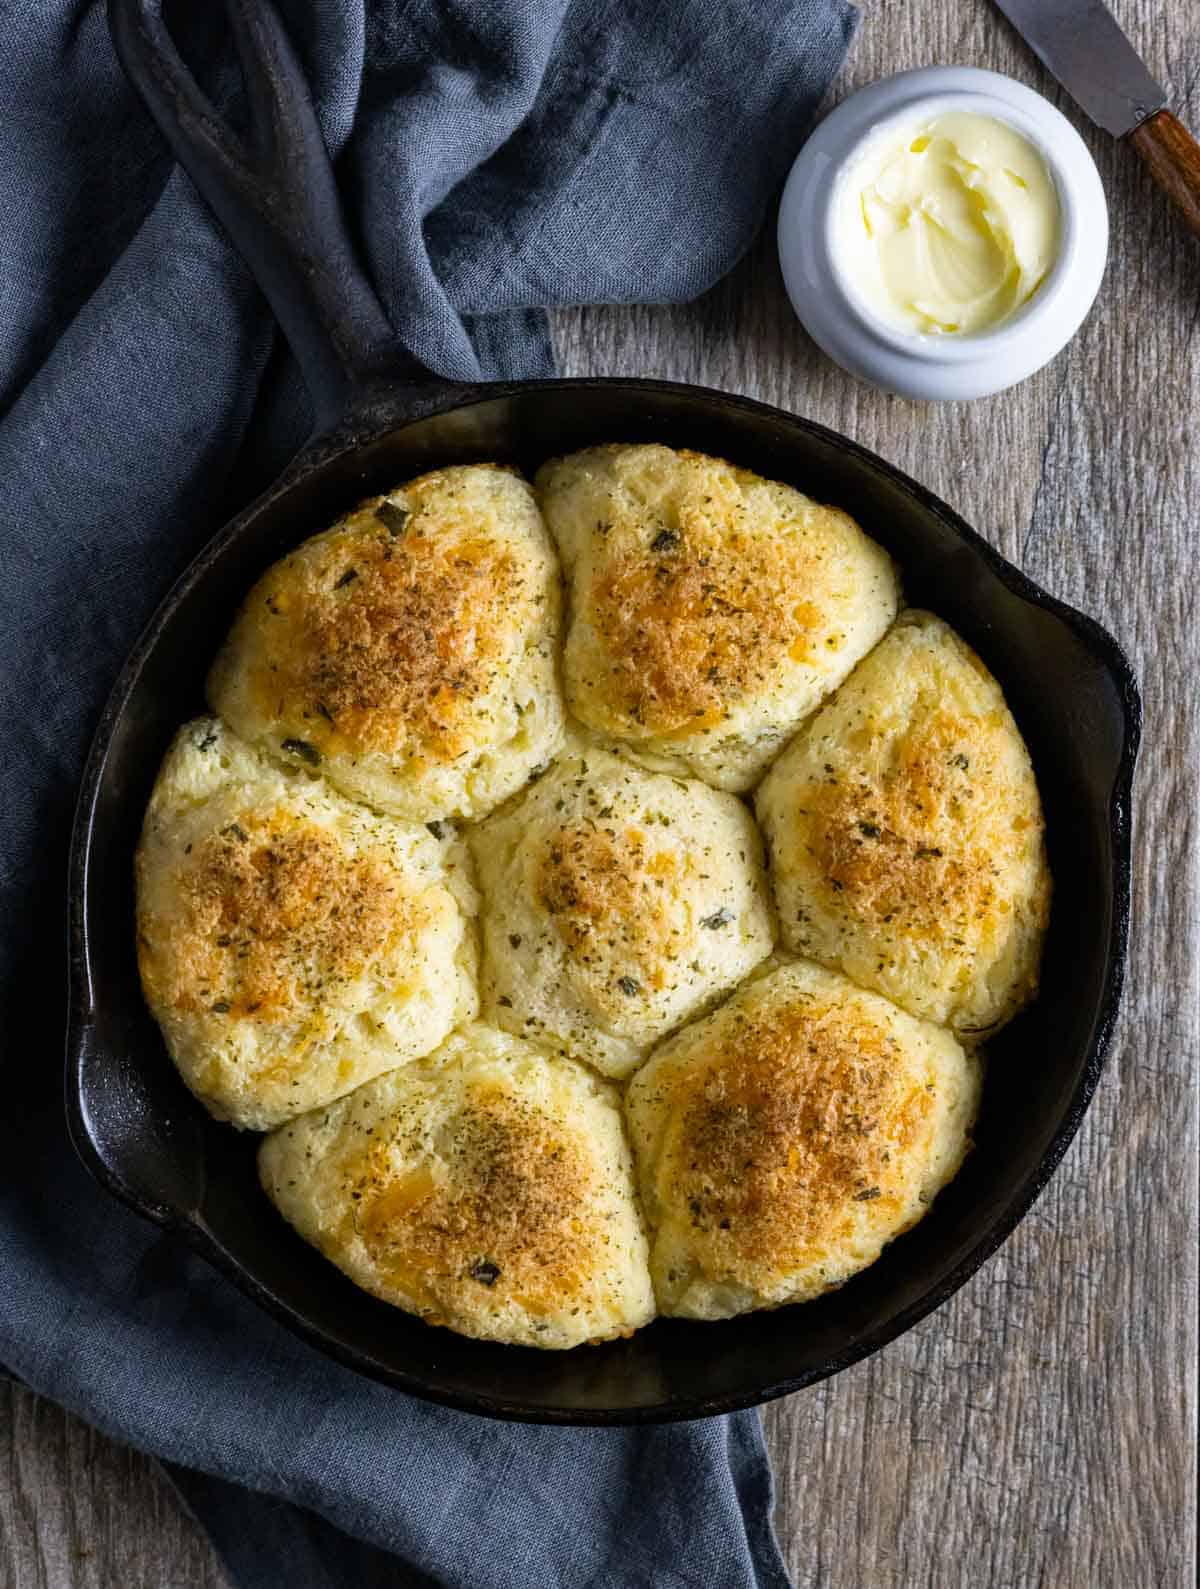 Seven golden rolls baked in a small cast iron skillet topped with herbs.